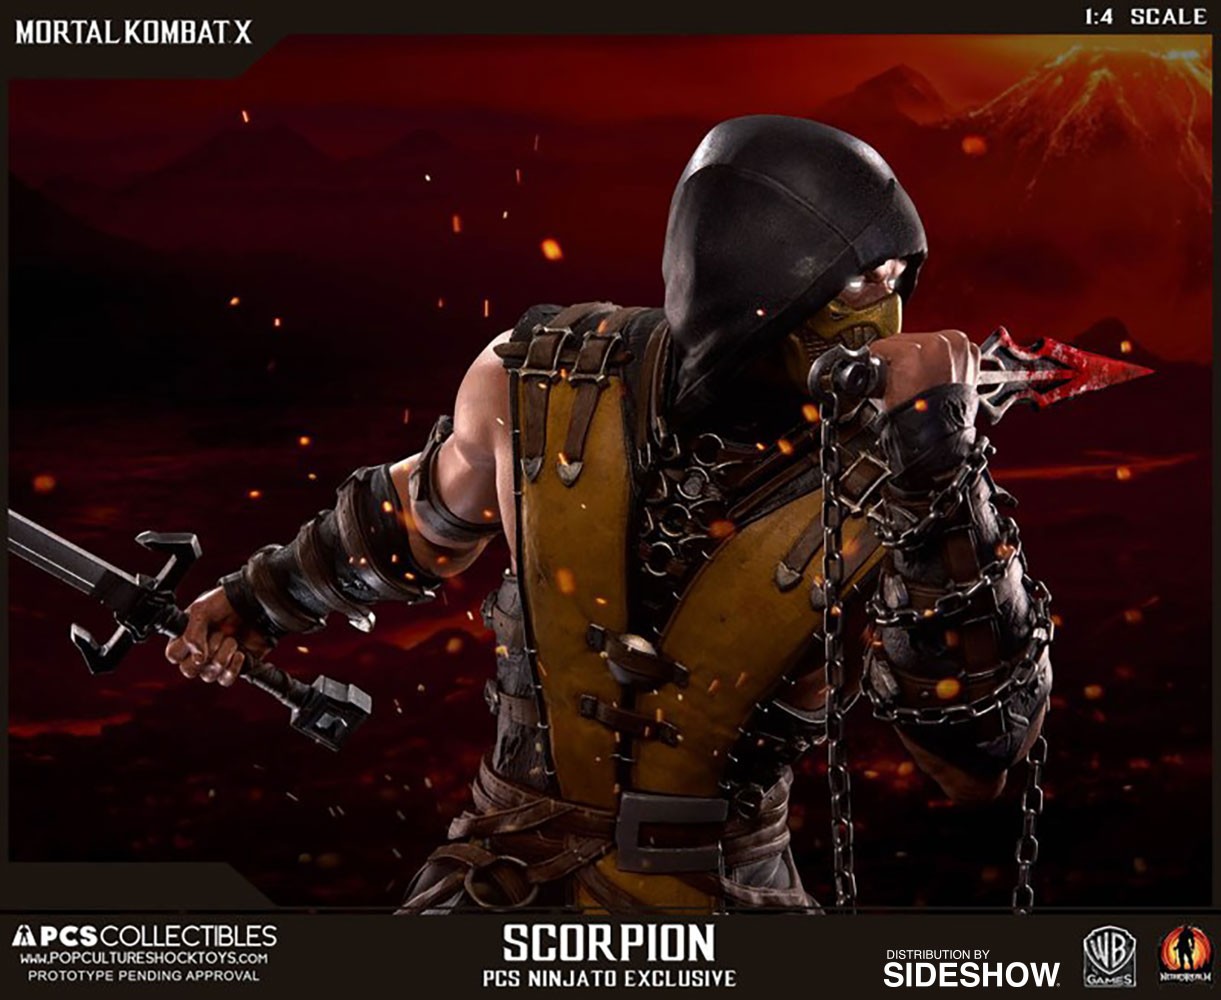 Scorpion Exclusive Edition View 21